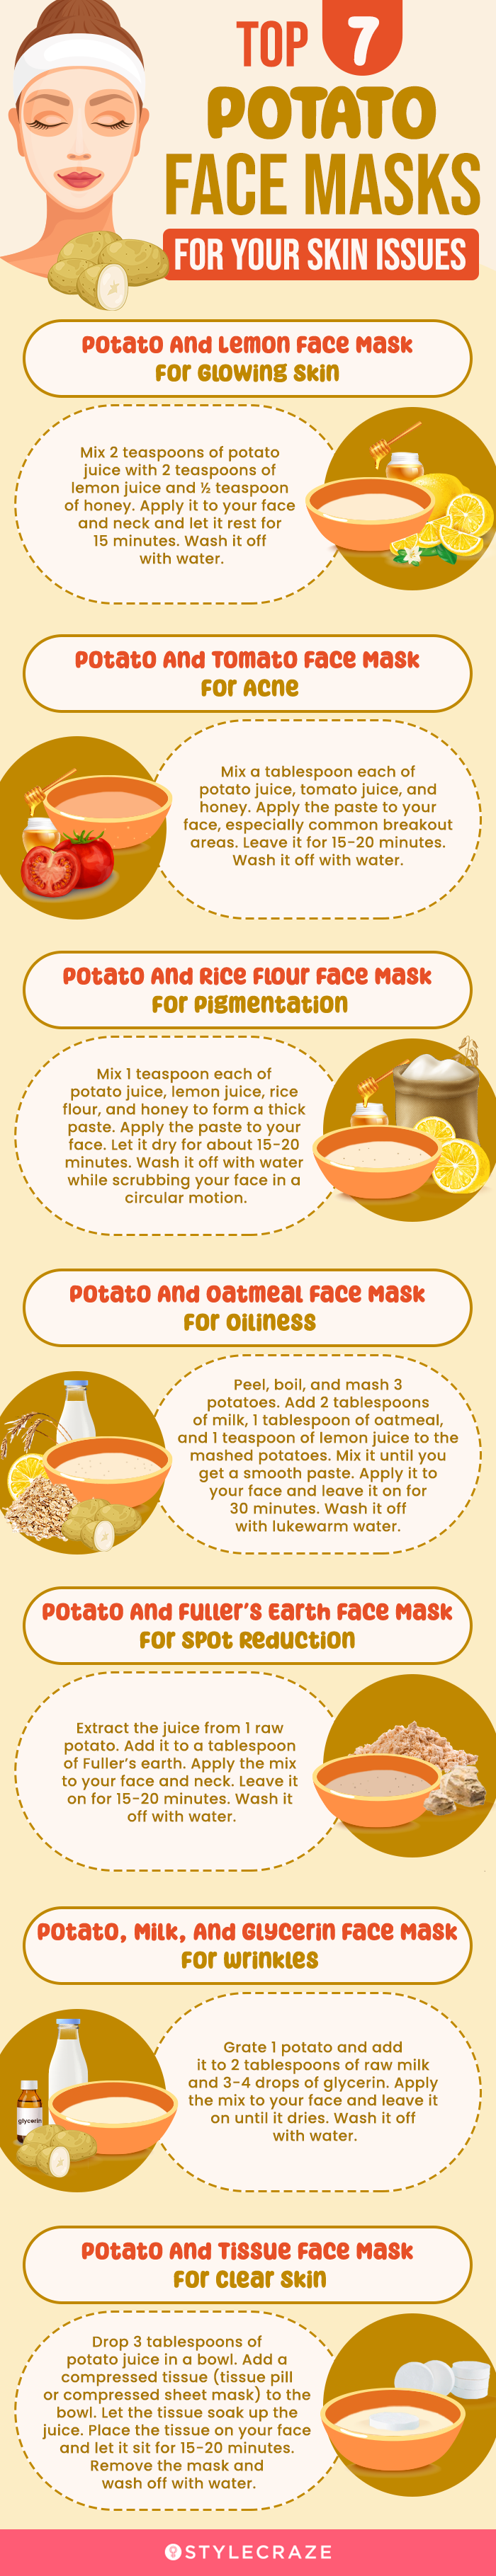 top 7 potato face masks for your skin issues [infographic]